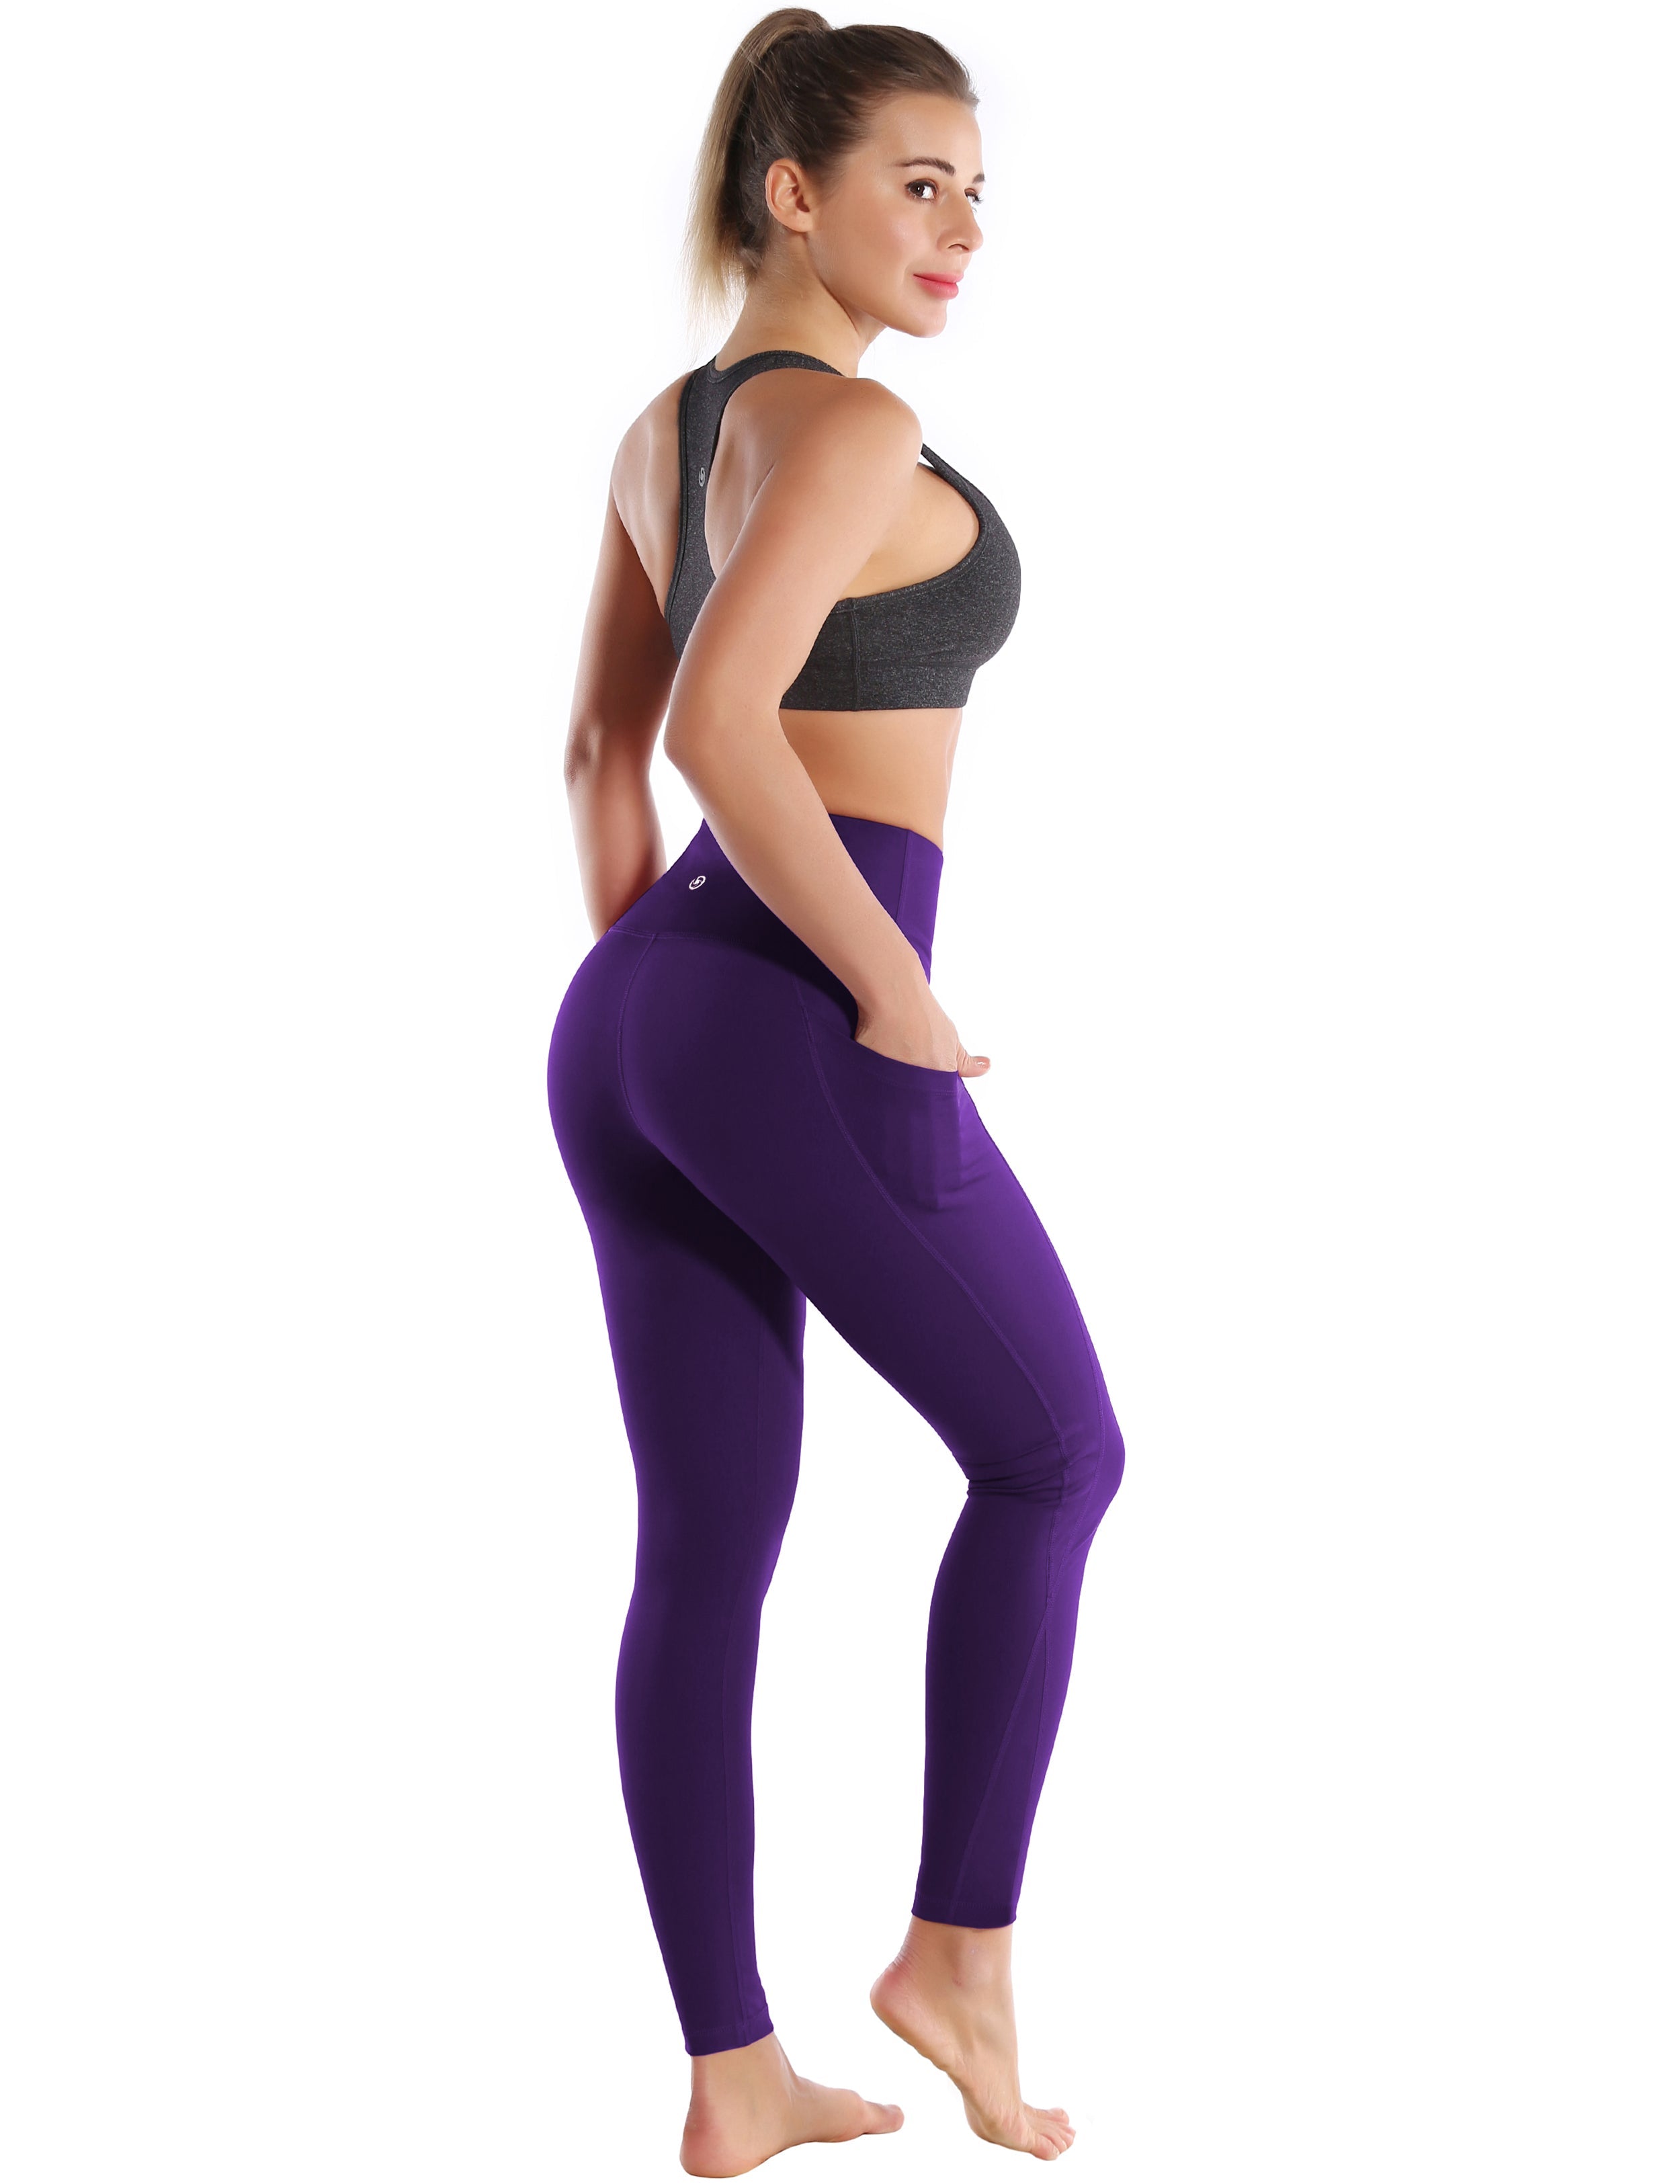 High Waist Side Pockets Biking Pants grapevine 75% Nylon, 25% Spandex Fabric doesn't attract lint easily 4-way stretch No see-through Moisture-wicking Tummy control Inner pocket